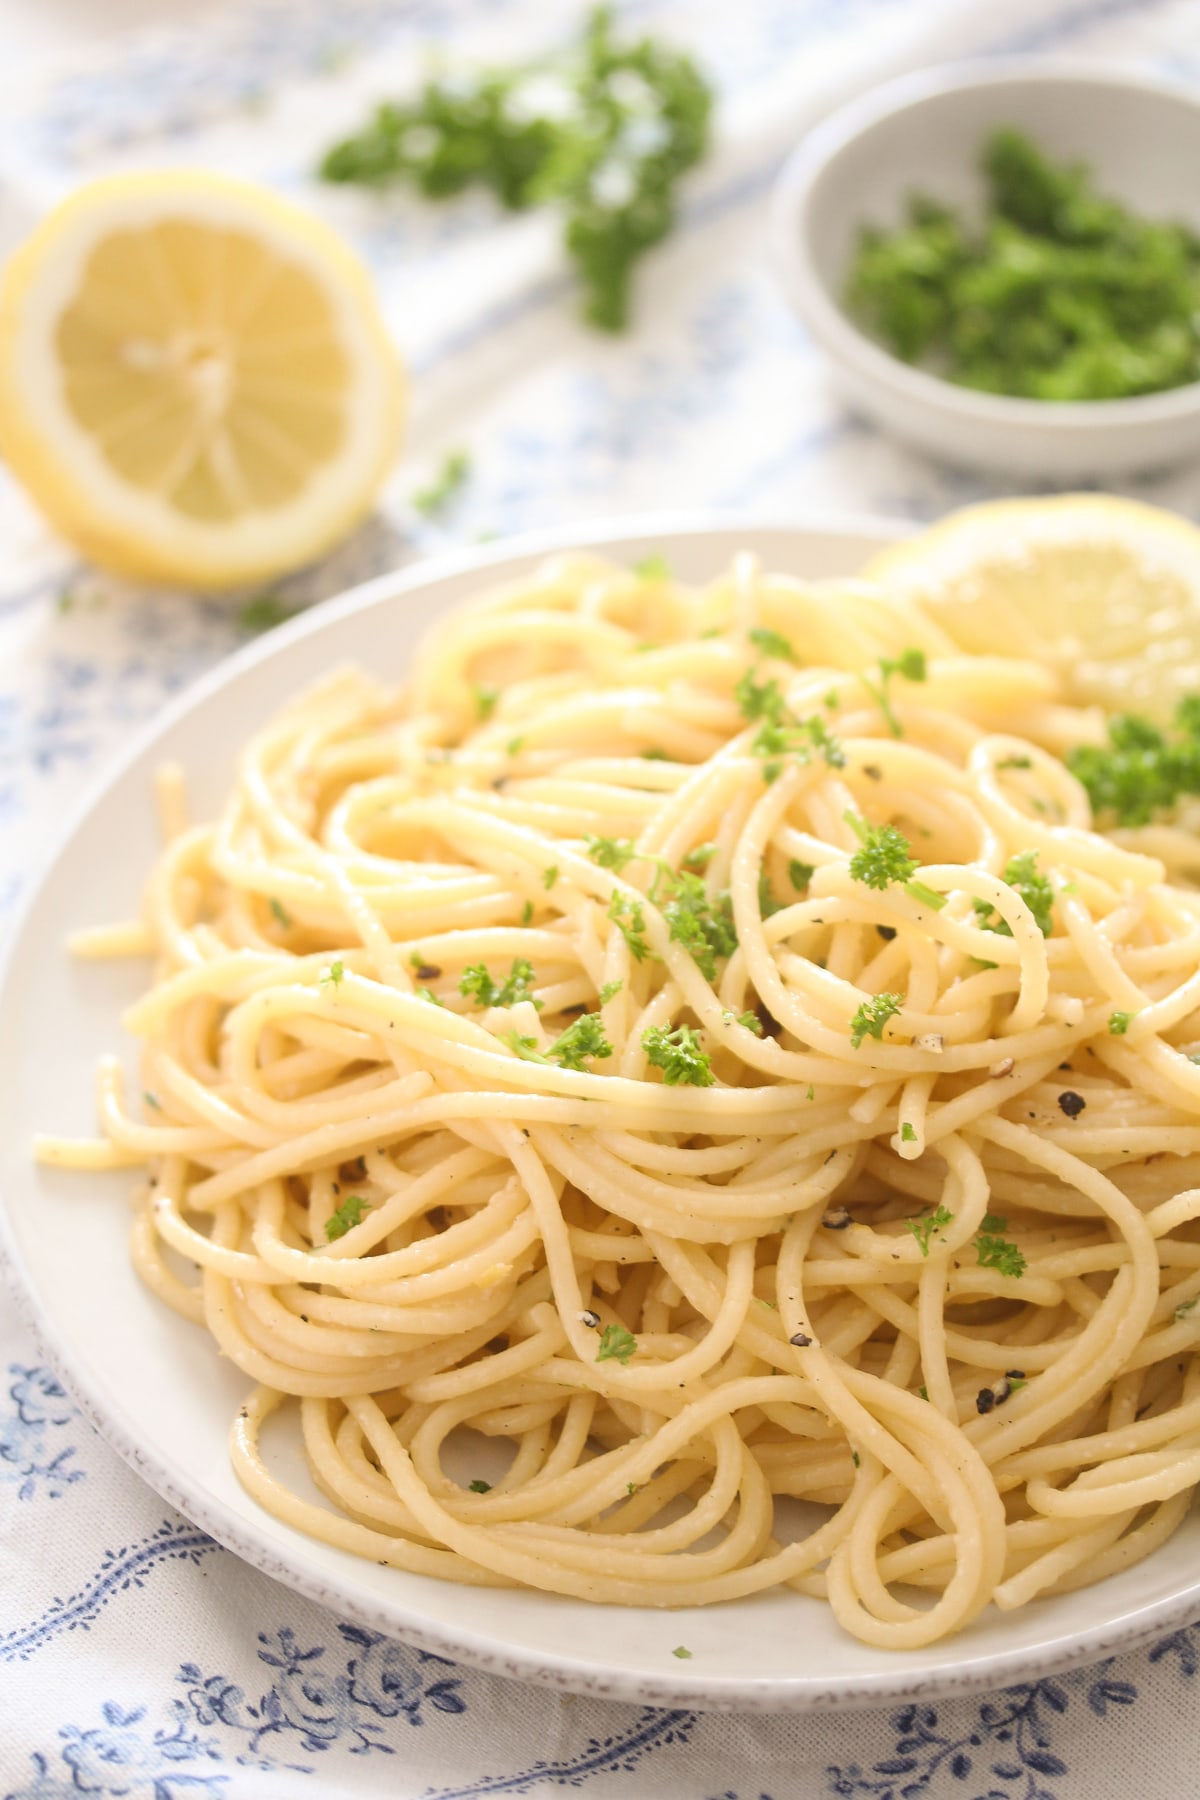 plate with a tangle of spaghetti with a halved lemon and parsley behind.